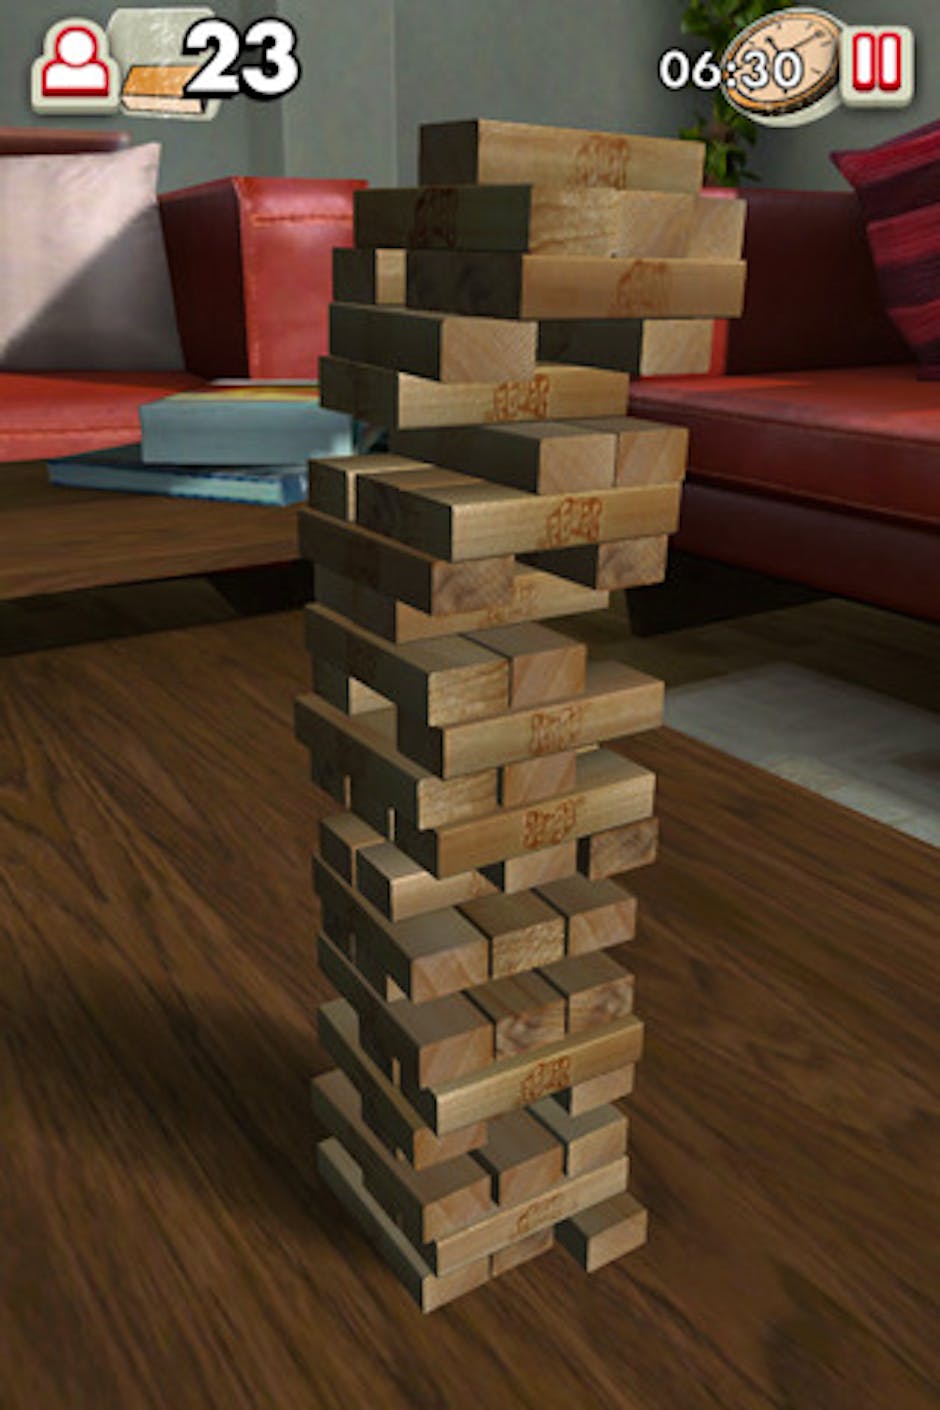 Jenga gets a block-toppling official game for iPhone and iPad | Recombu